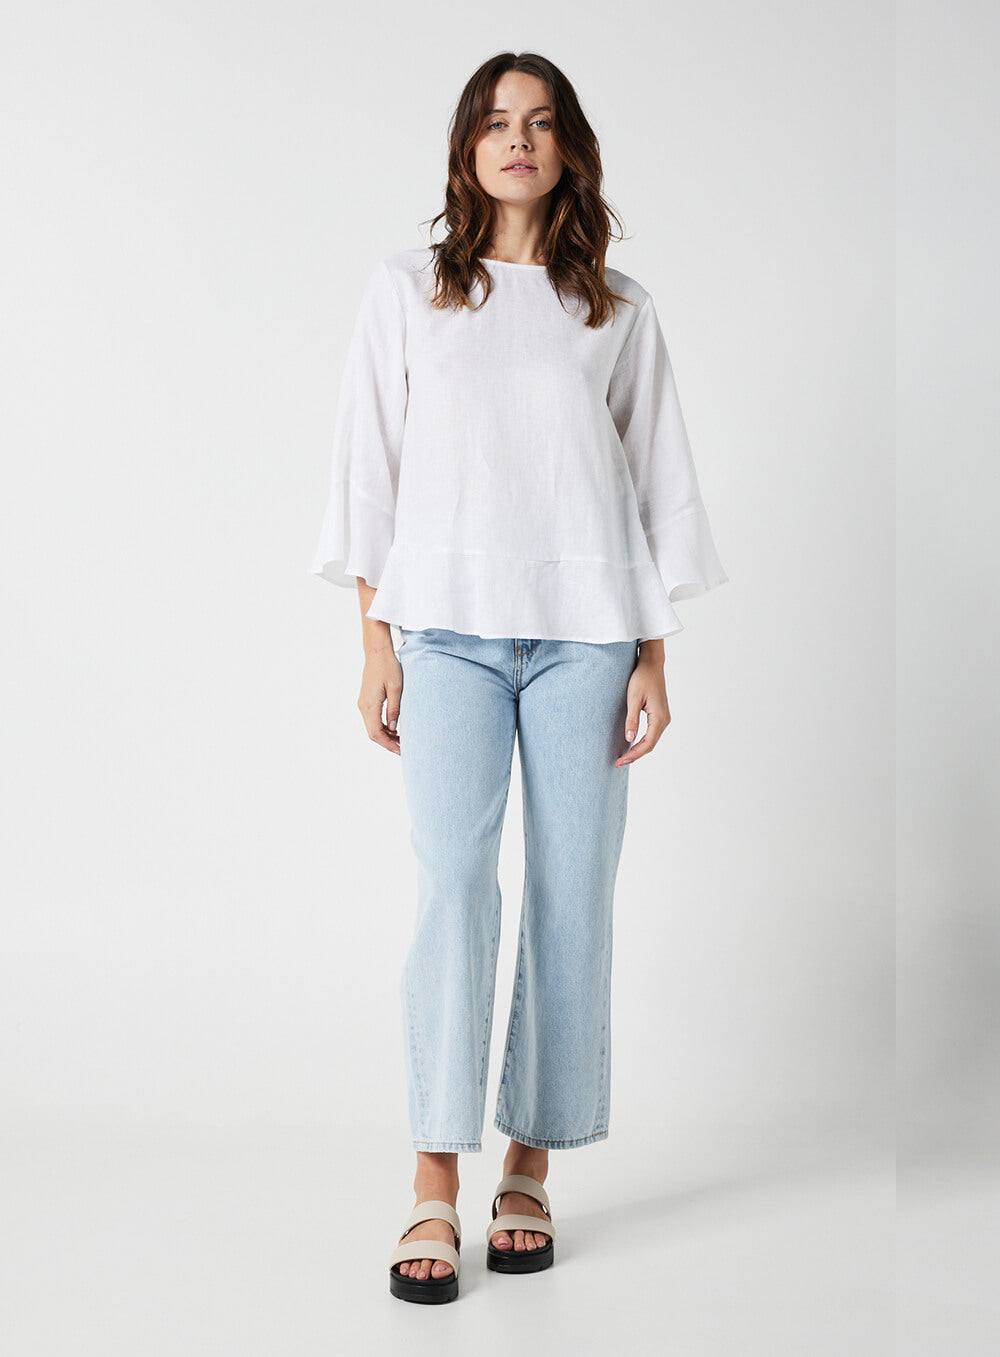 Evelyn Top-White